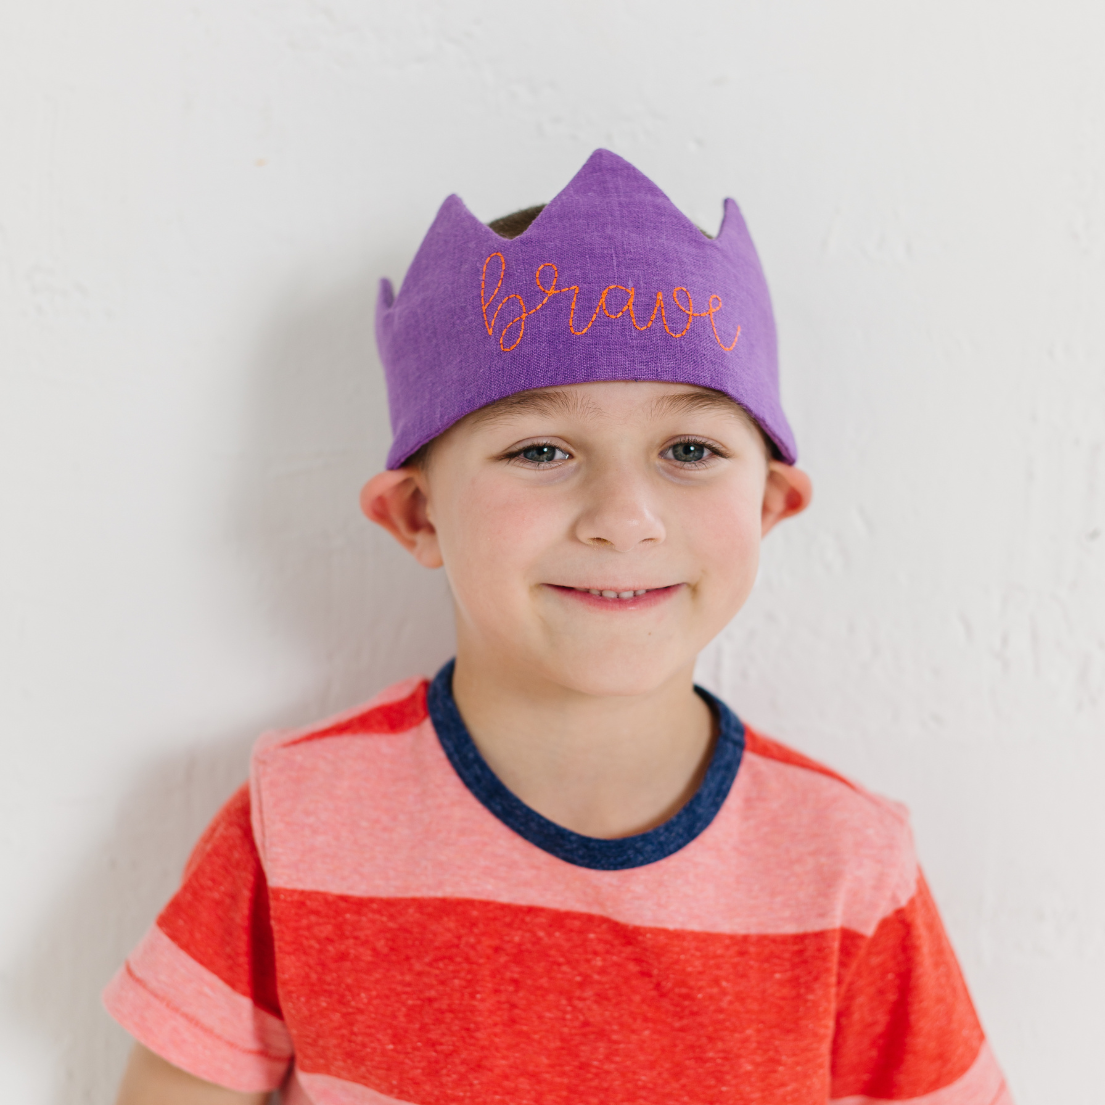 Fabric Crowns with Affirmations | "Beautiful embroidery!"